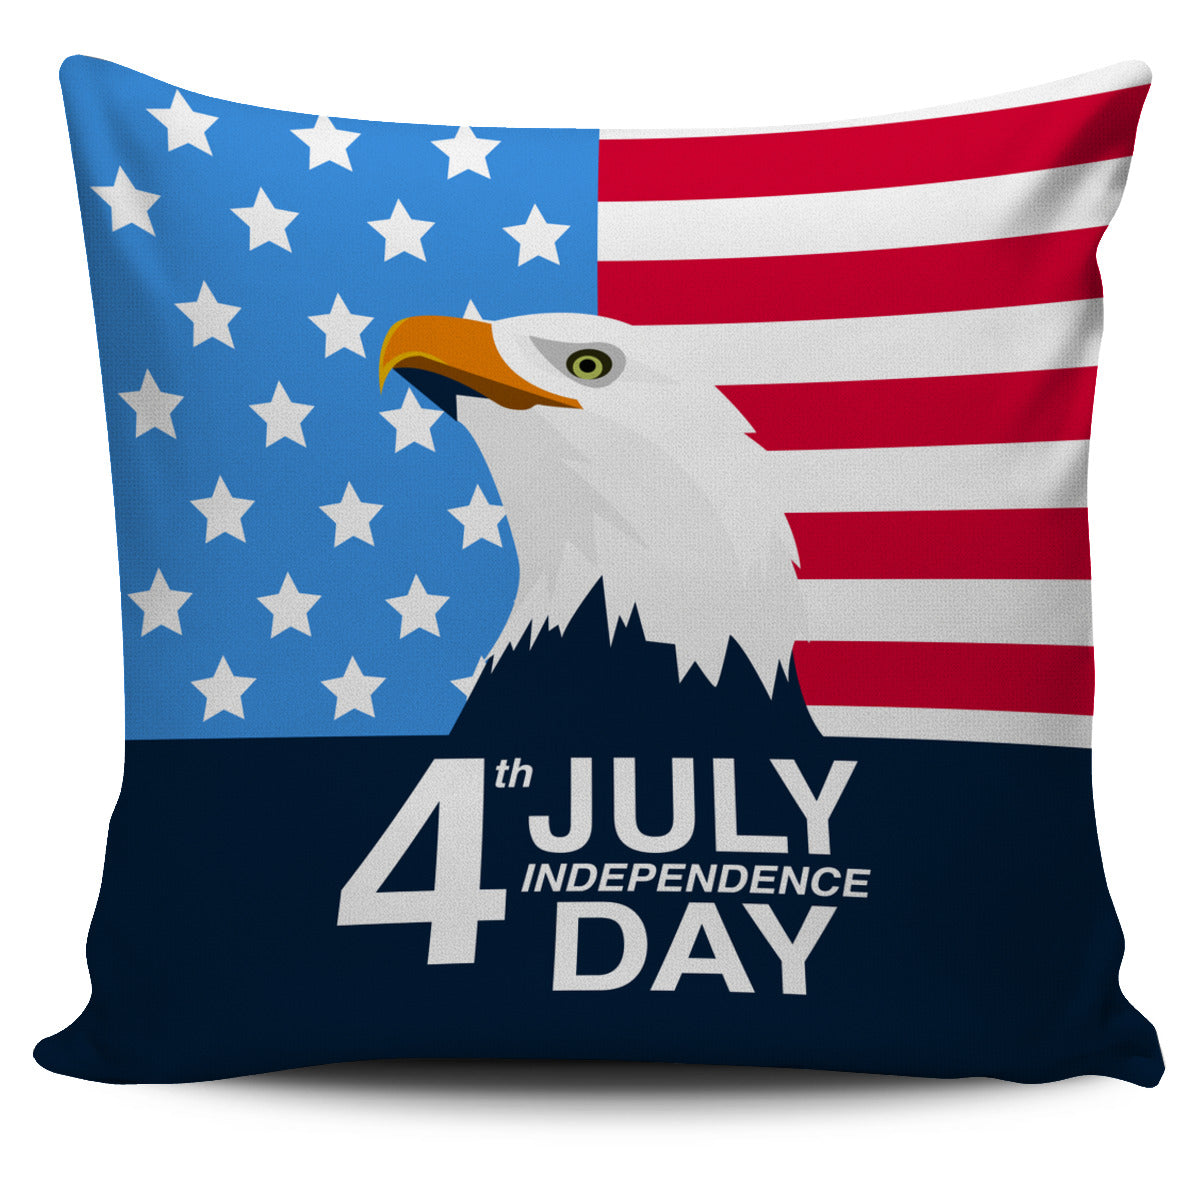 American Eagle Pillow Cover